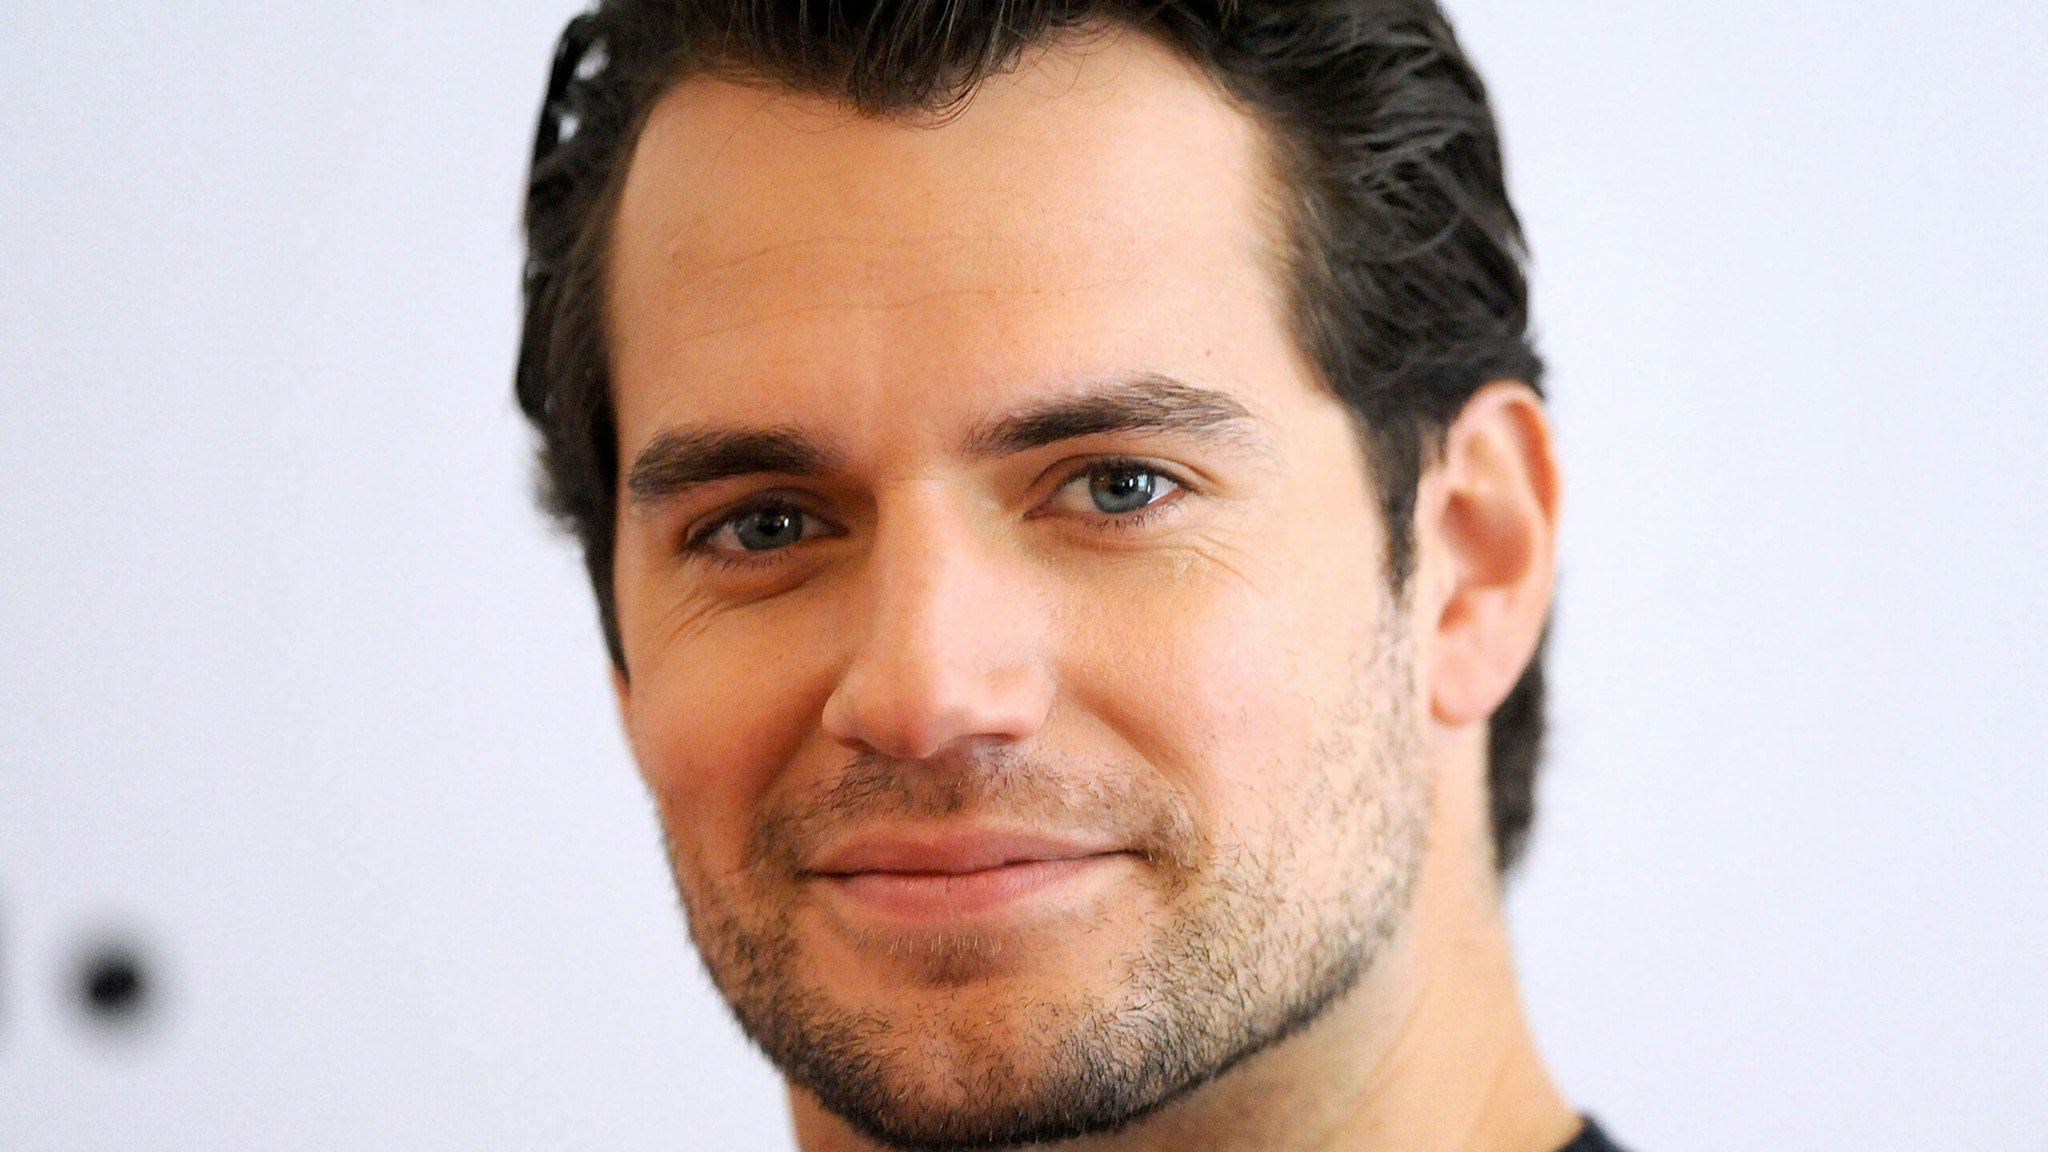 LONDON, ENGLAND - JULY 23: SUN NEWSPAPER OUT. MANDATORY CREDIT PHOTO BY DAVE J. HOGAN GETTY IMAGES REQUIRED Henry Cavill attends 'The Man from U.N.C.L.E.' photocall at Claridge's Hotel on July 23, 2015 in London, England.